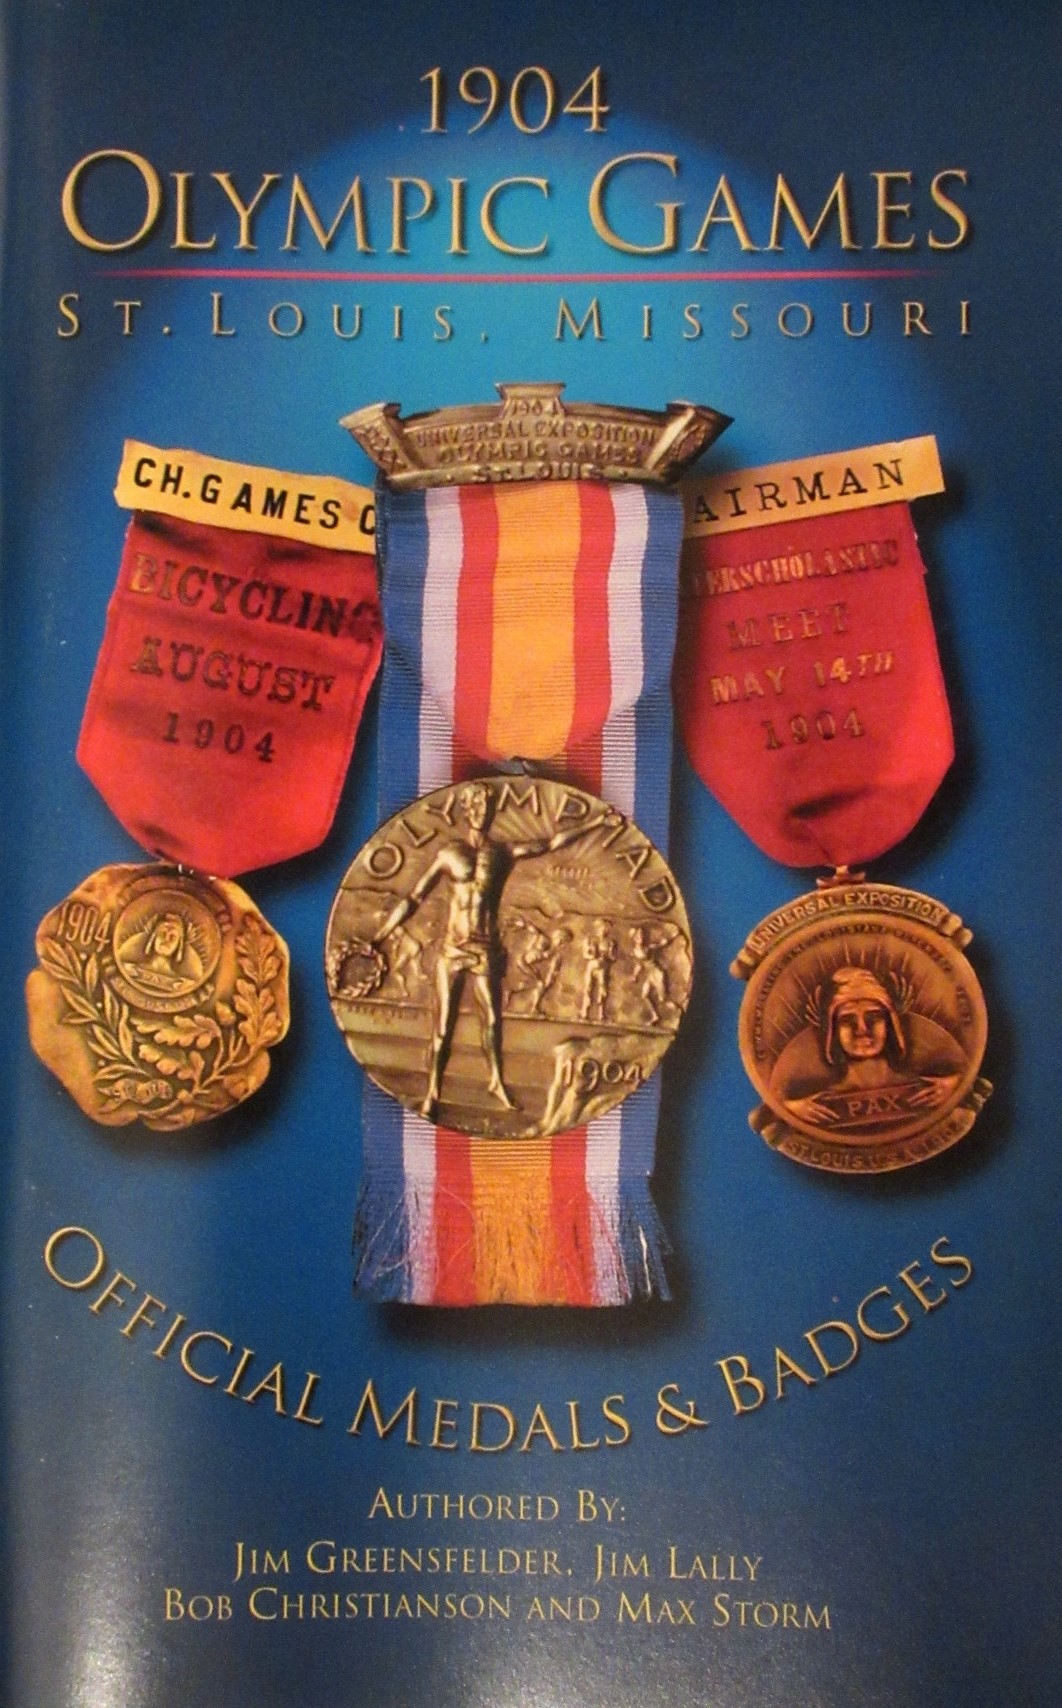 1904 Olympic Games St. Louis, Missouri: Official Medals & Badges